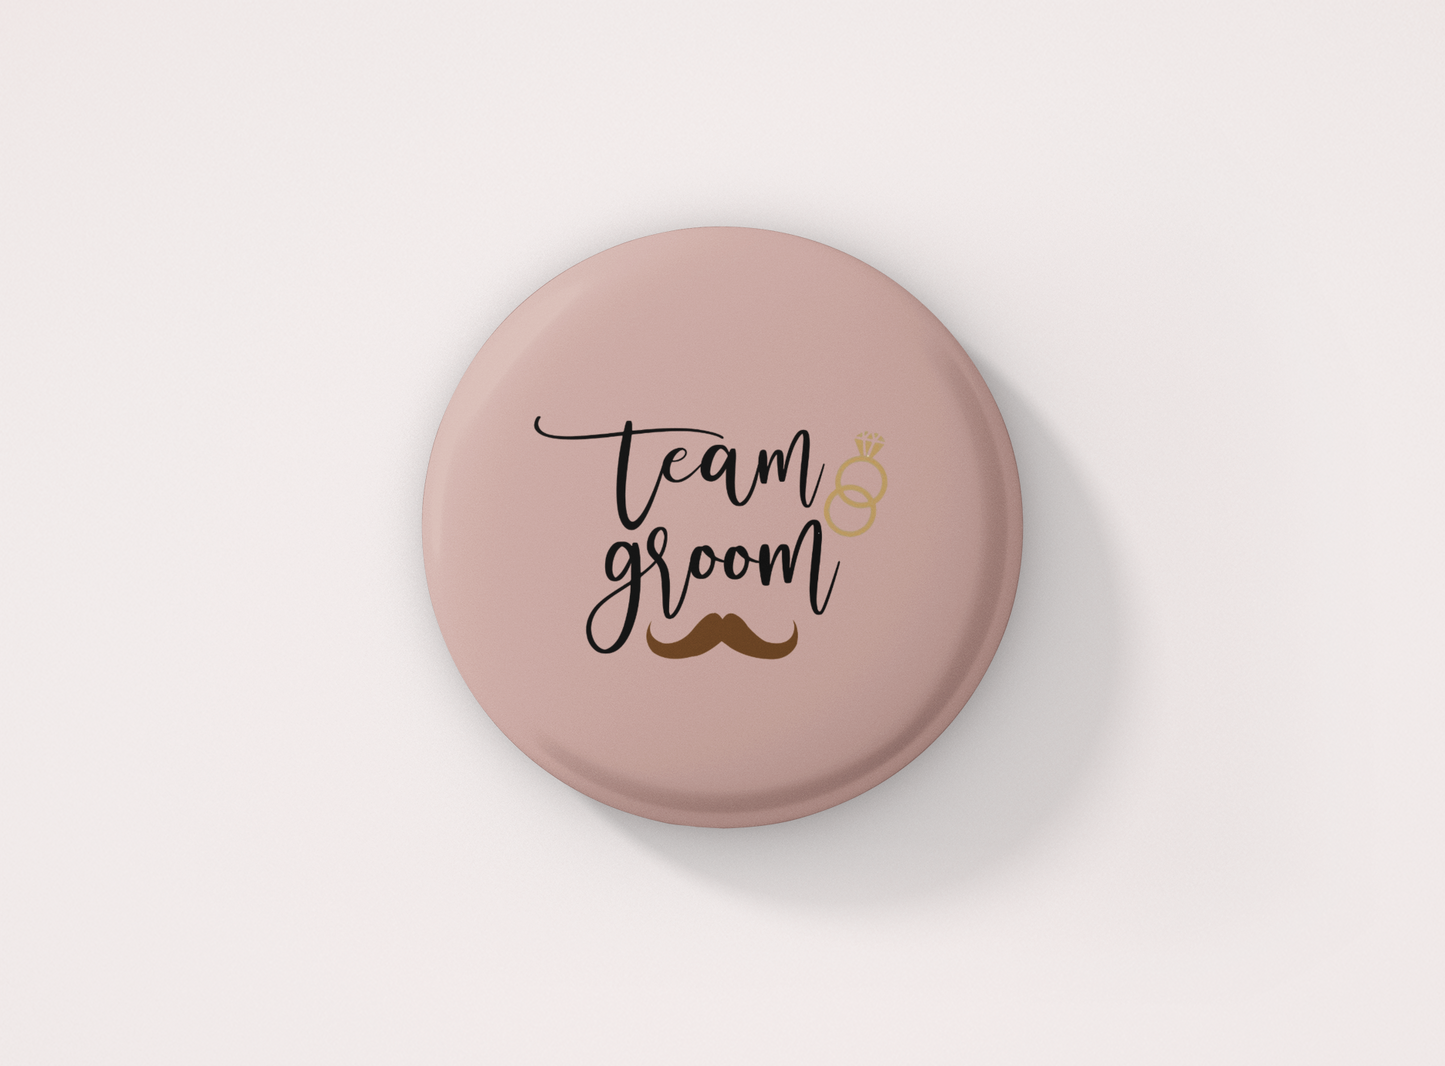 Team Groom! Pin Button Badge - Pack of 1